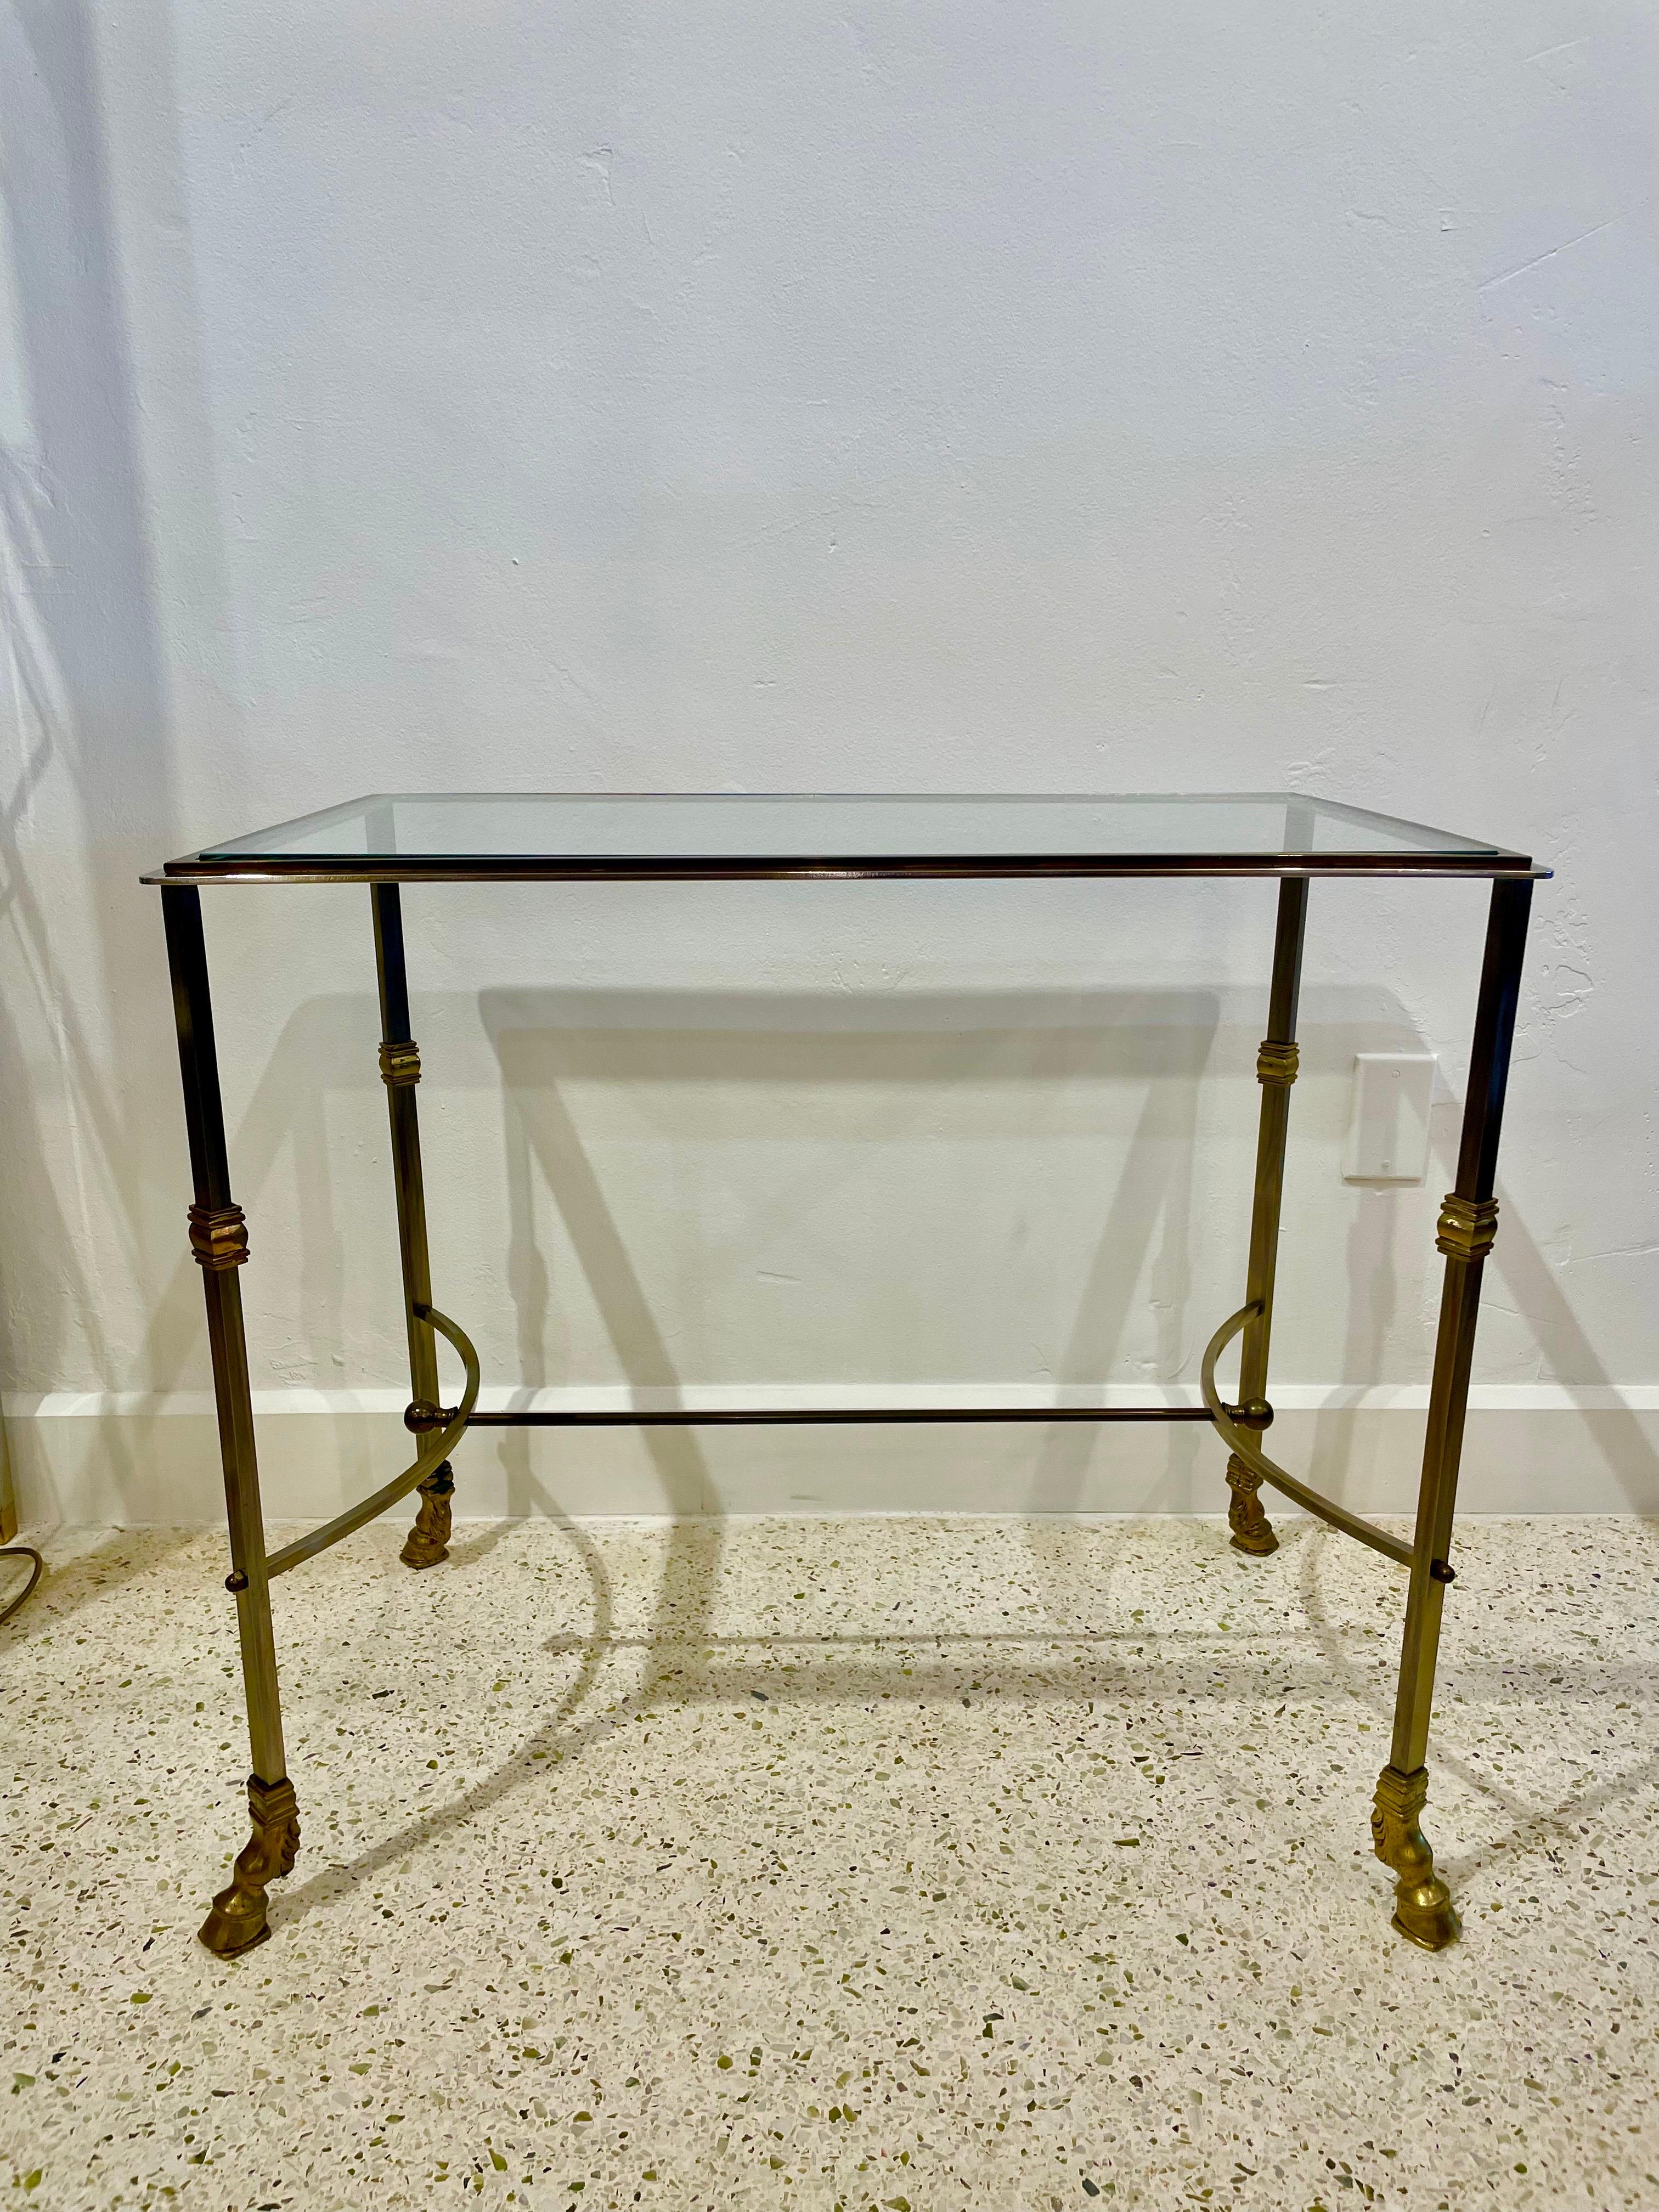 This two-toned console (brass and brushed steel) has a glass plateau and brass stretcher.  ALL original and in wonderful condition with age and patina to brass and steel.  